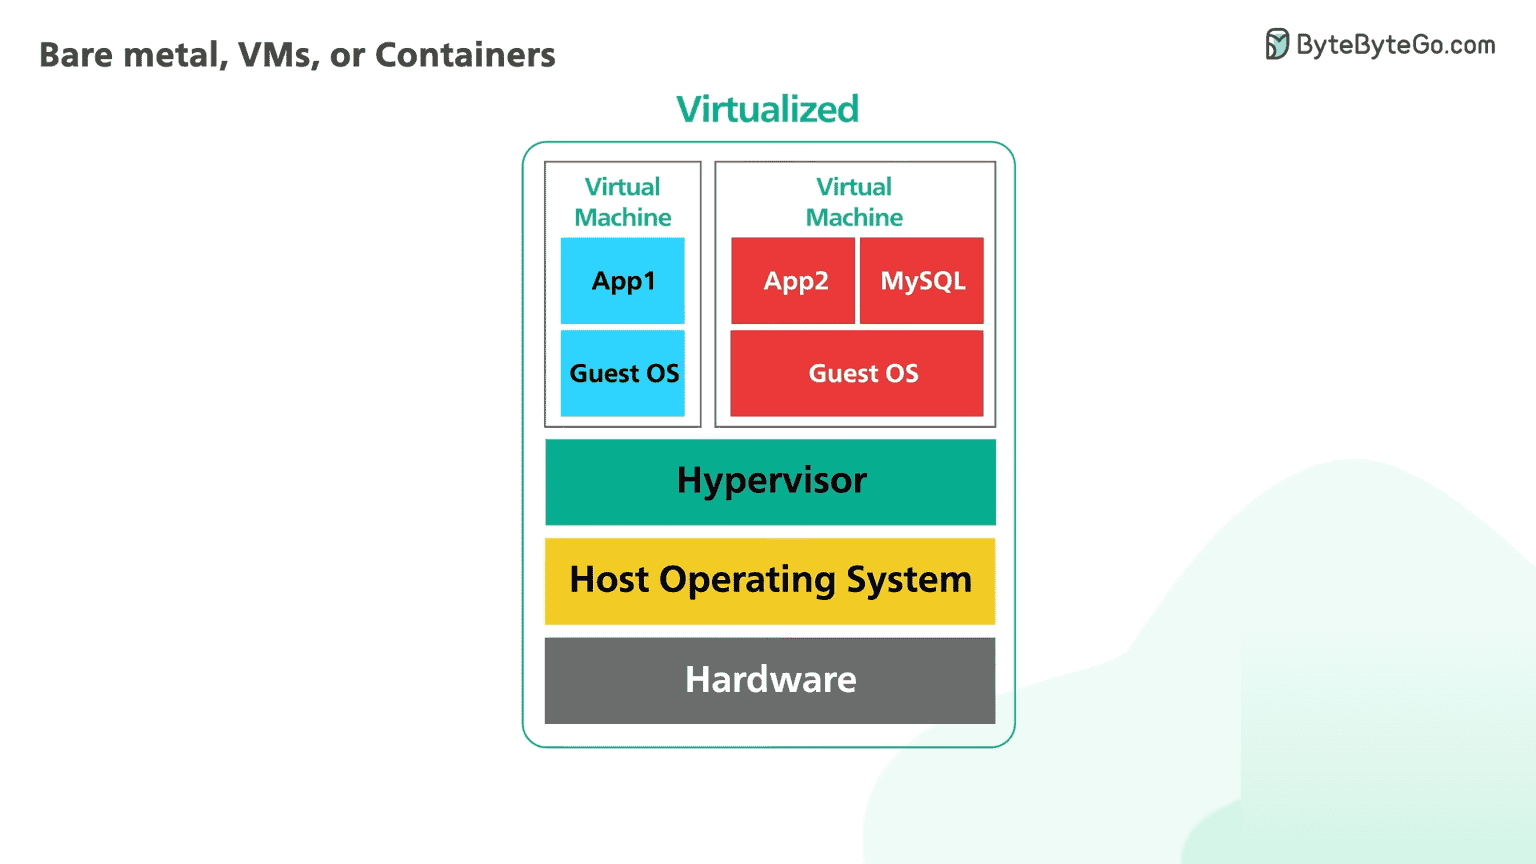 What are Virtual Machines?